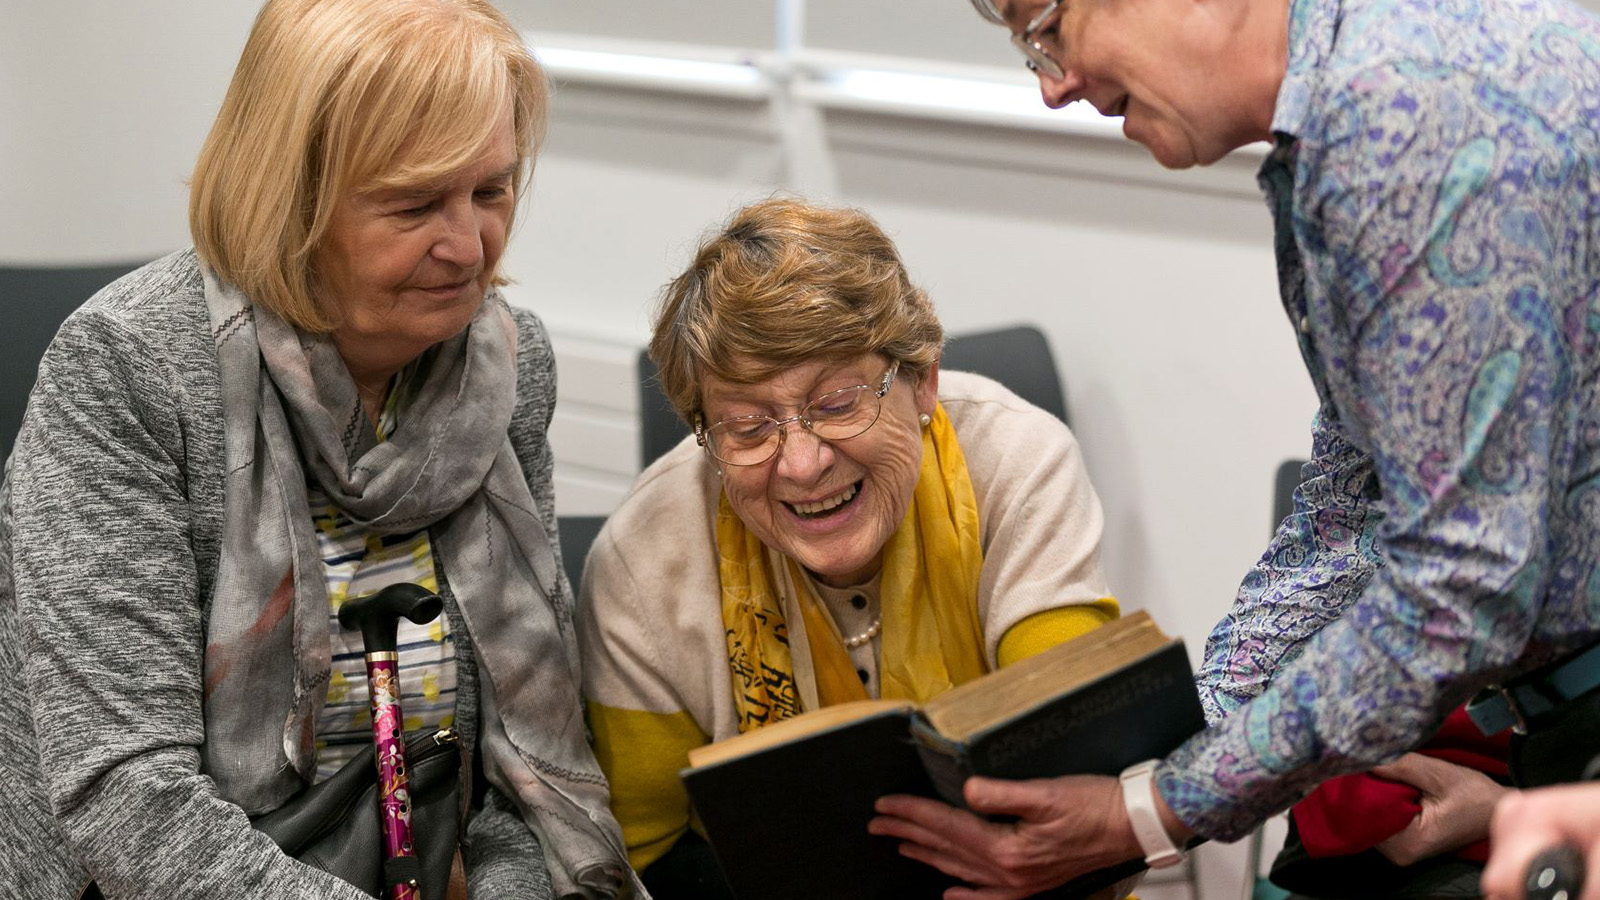 Three older women sit together laughing and reading a book